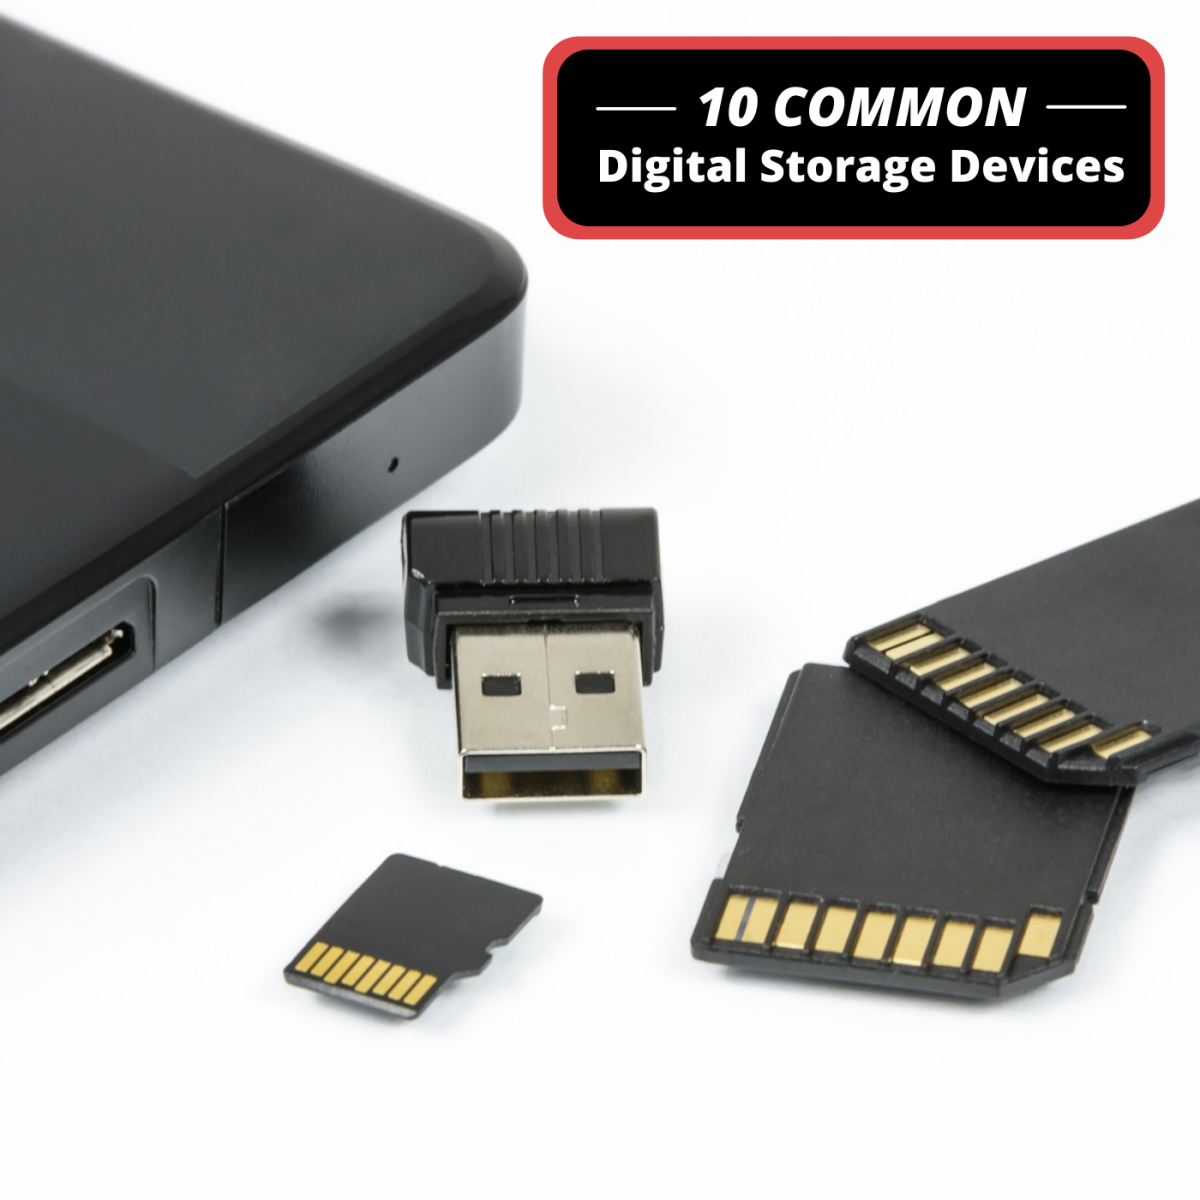 Computer Basics: 10 Examples of Storage Devices for Digital Data